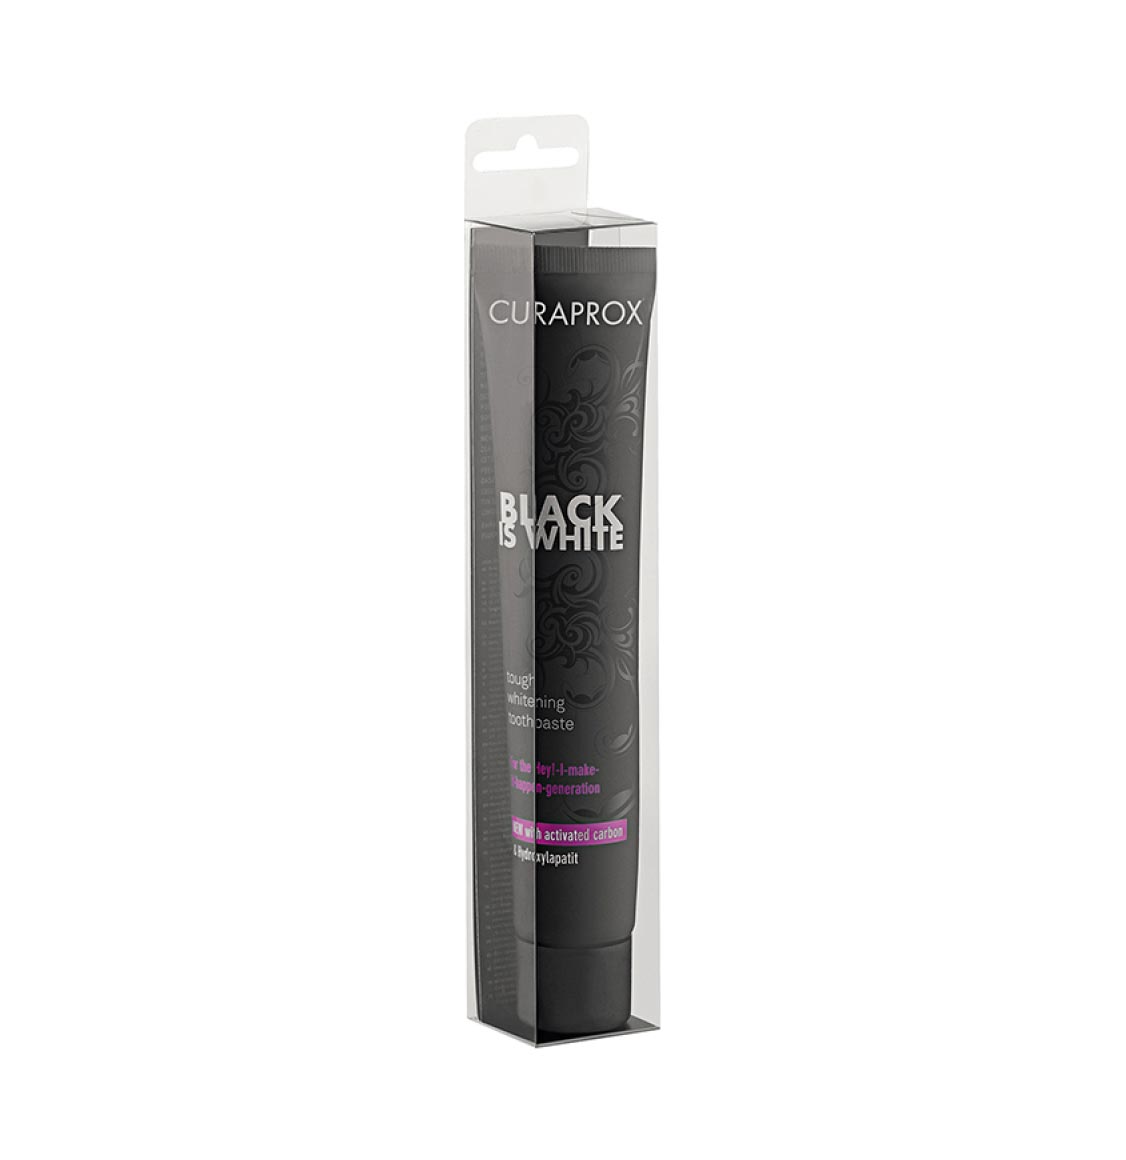 Curaprox Black Is White Charcoal Whitening Toothpaste 90ml